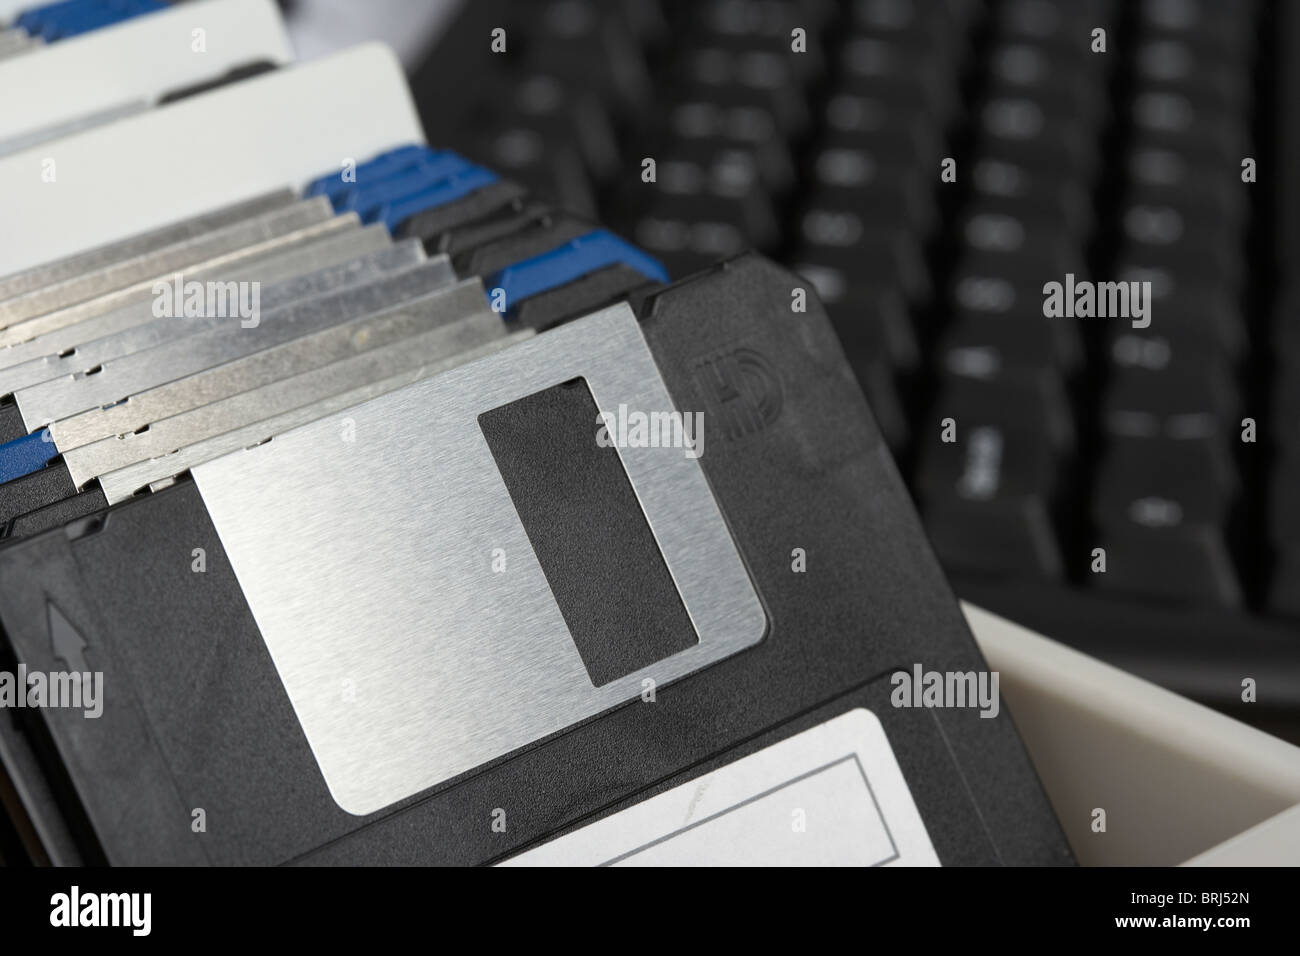 box of old floppy storage disks in front of a computer keyboard Stock Photo